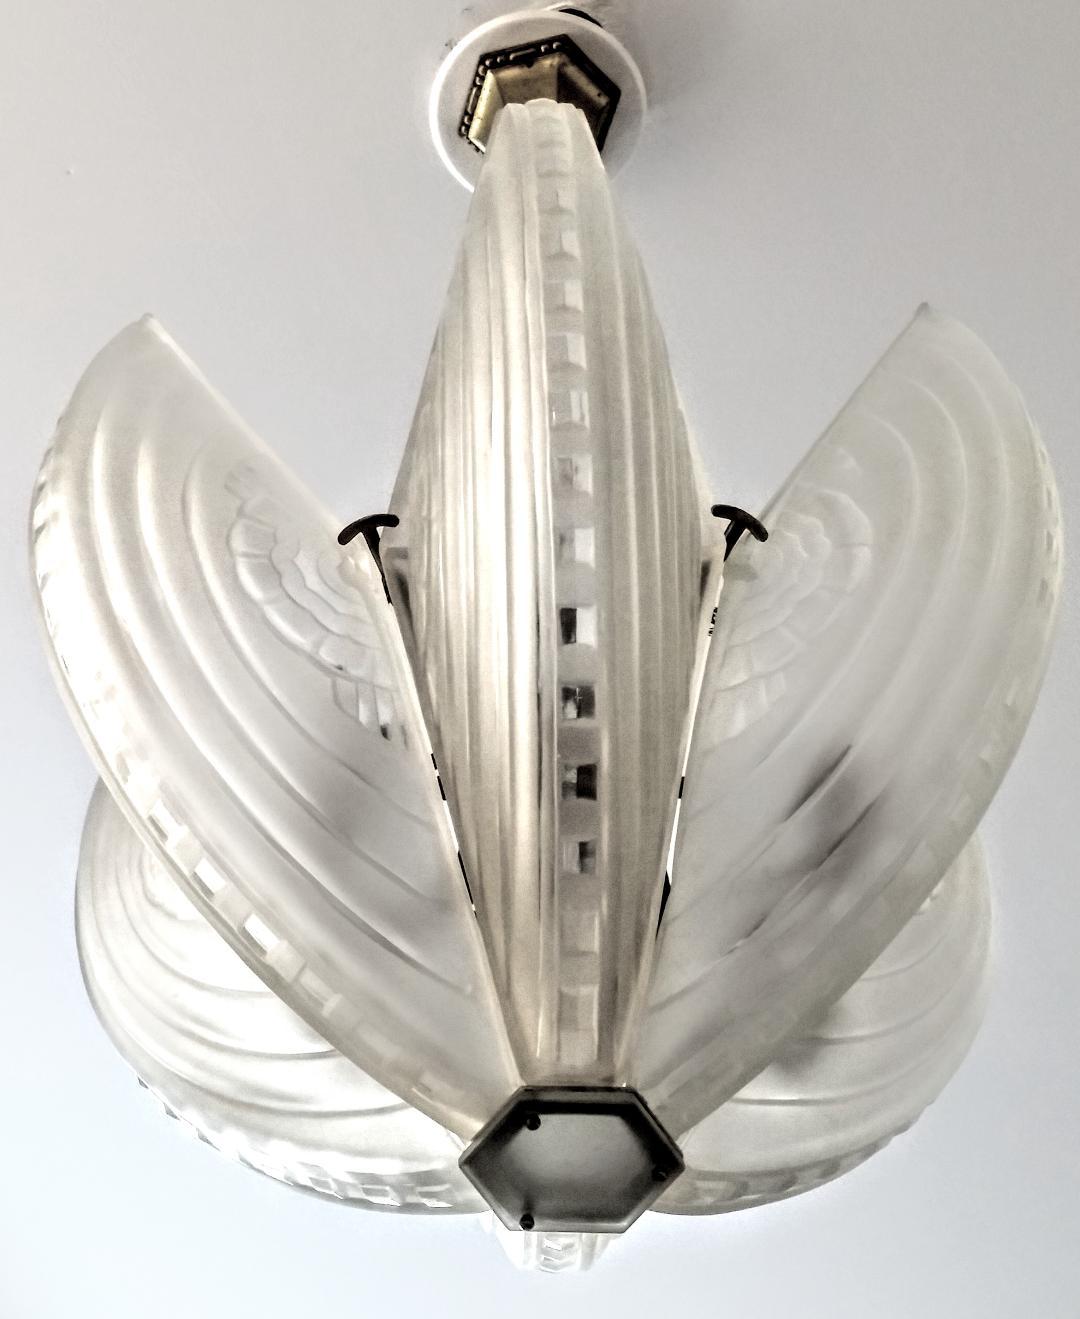 A stunning extremely rare French Art Deco chandelier or pendant created by 